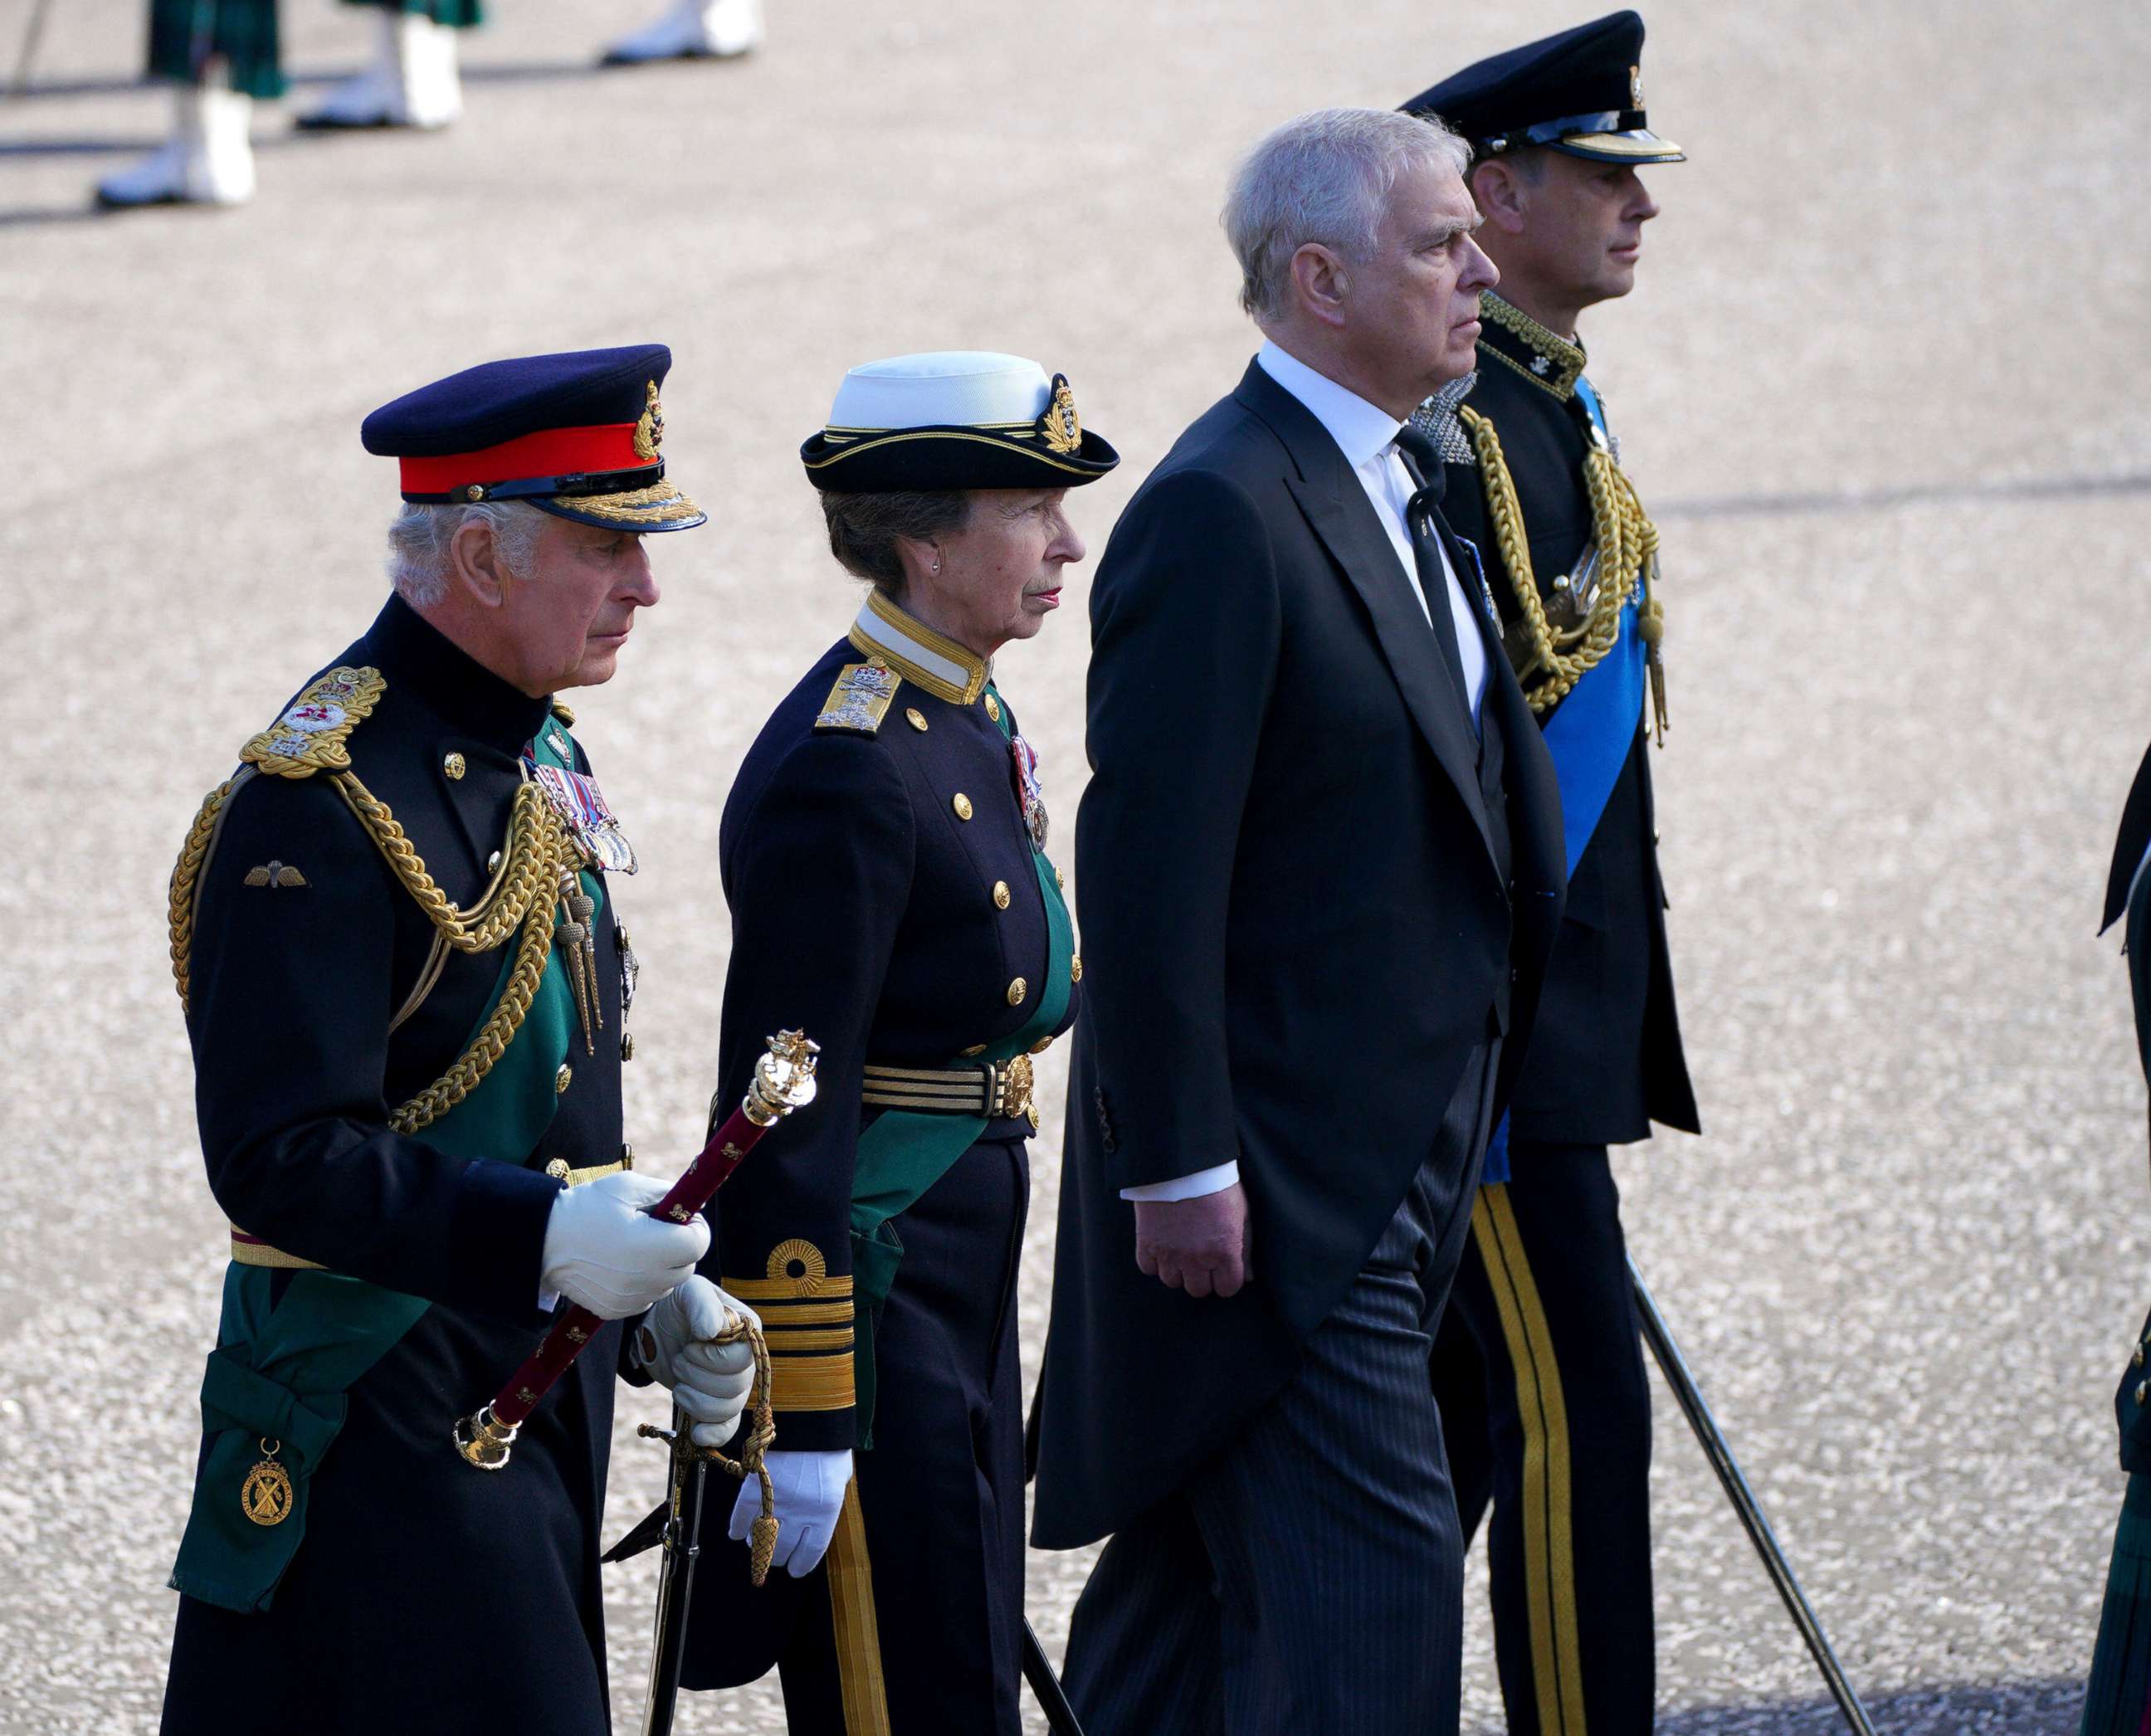 PHOTO: King Charles III, Princess Anne, Prince Andrew and Prince Edward walk behind the coffin of Queen Elizabeth II, during the procession from the Palace of Holyroodhouse to St Giles' Cathedral, in Edinburgh, Sept. 12, 2022.